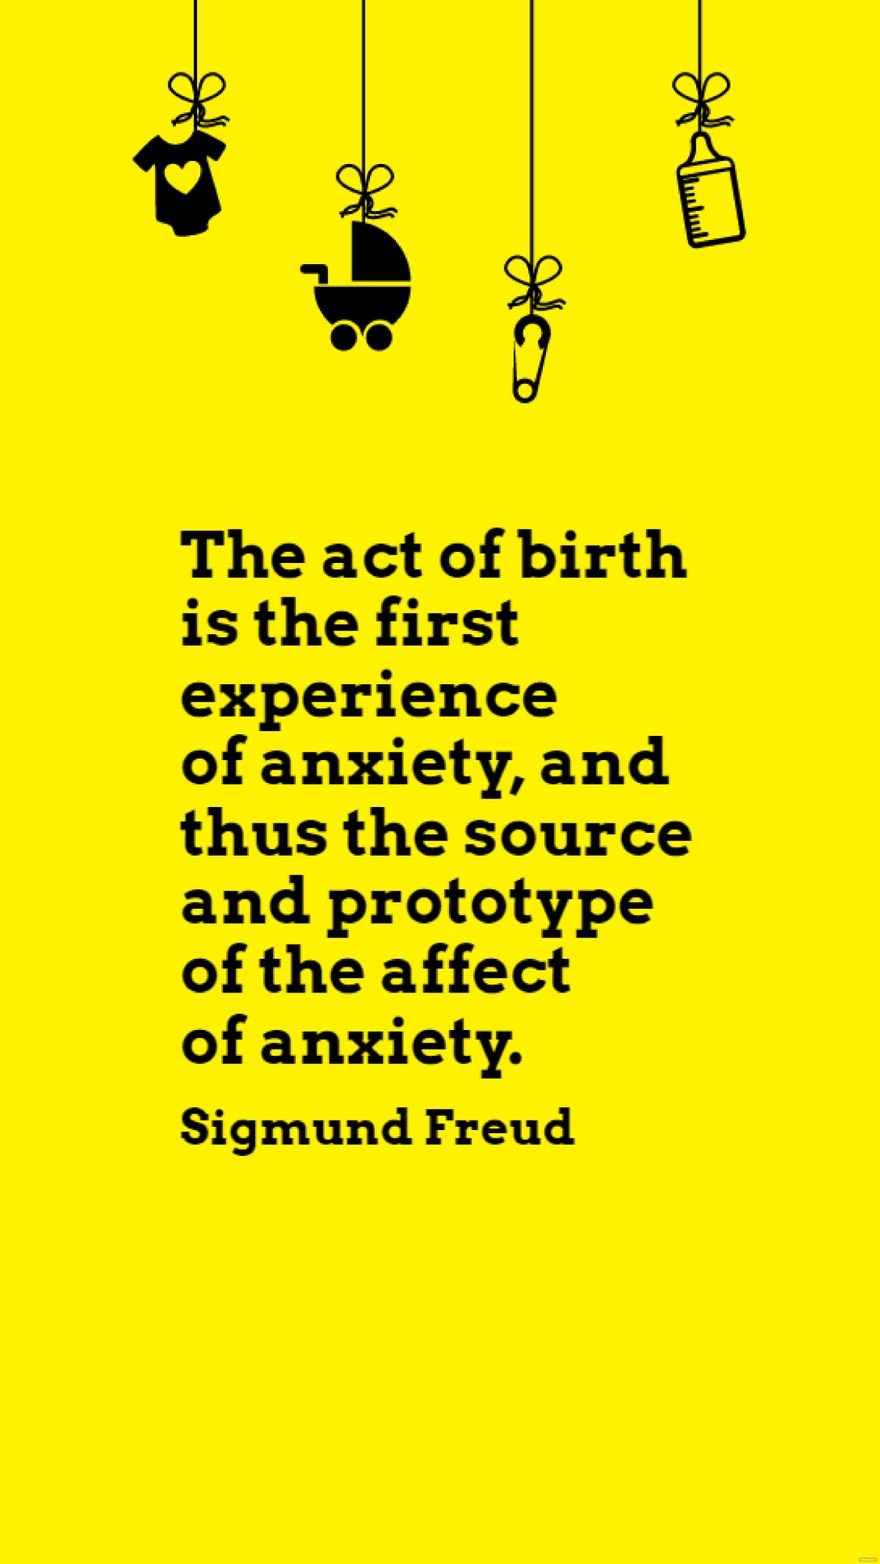 Sigmund Freud - The act of birth is the first experience of anxiety, and thus the source and prototype of the affect of anxiety.